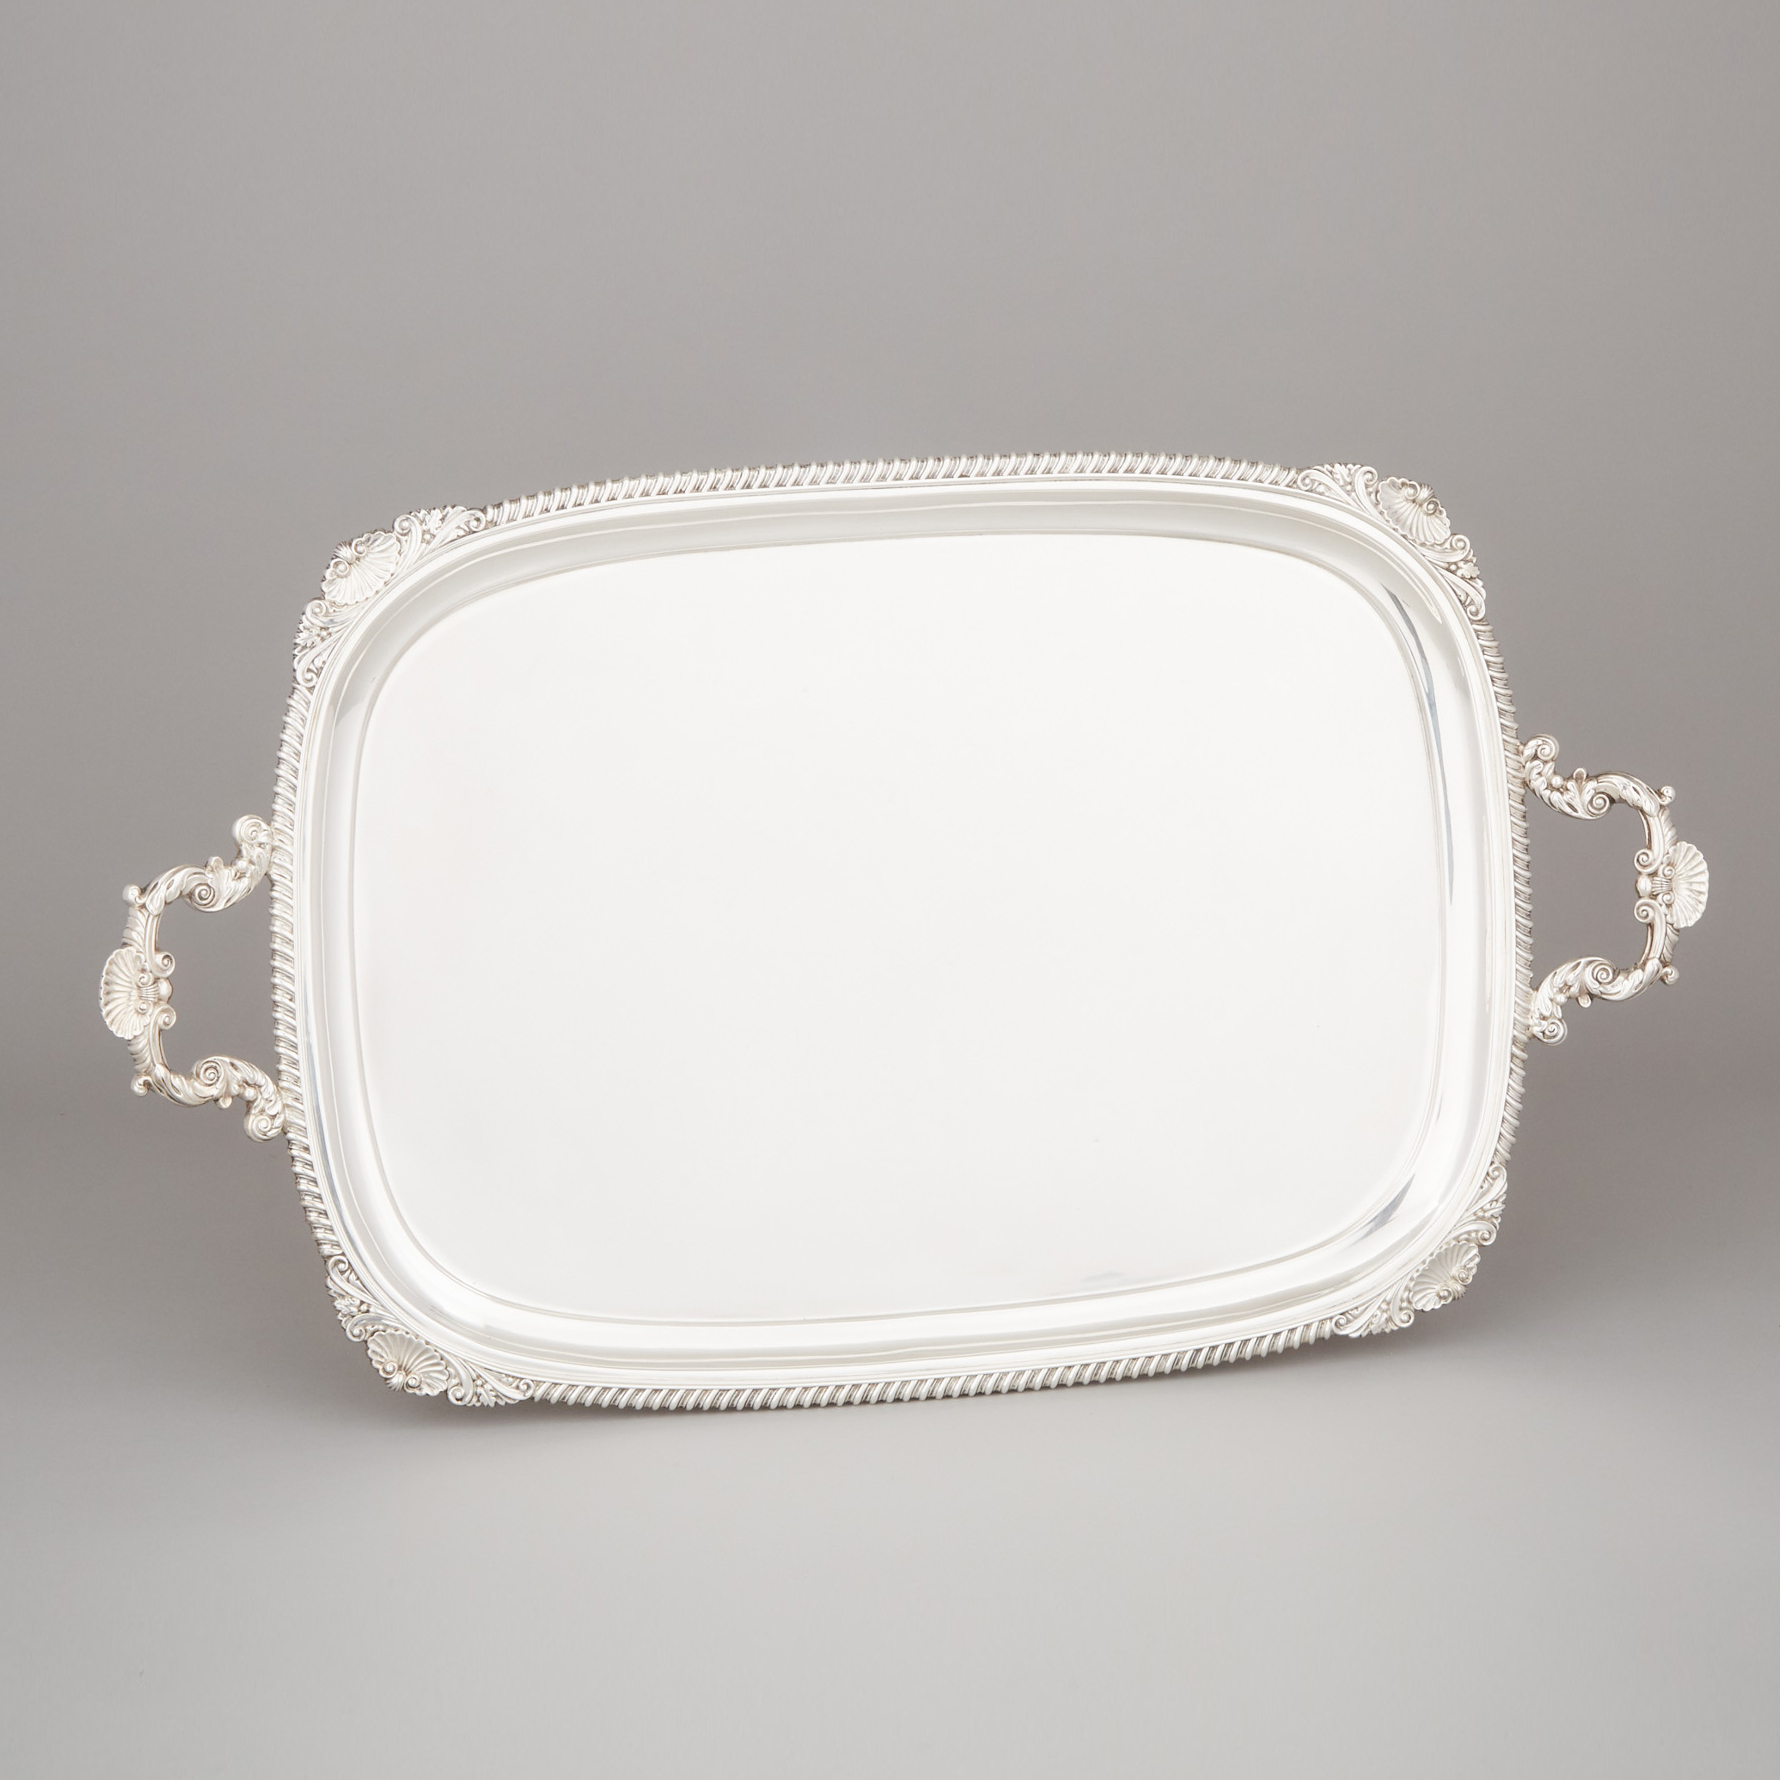 English Silver Two-Handled Serving Tray, Harrison Bros. & Howson, Sheffield, 1948